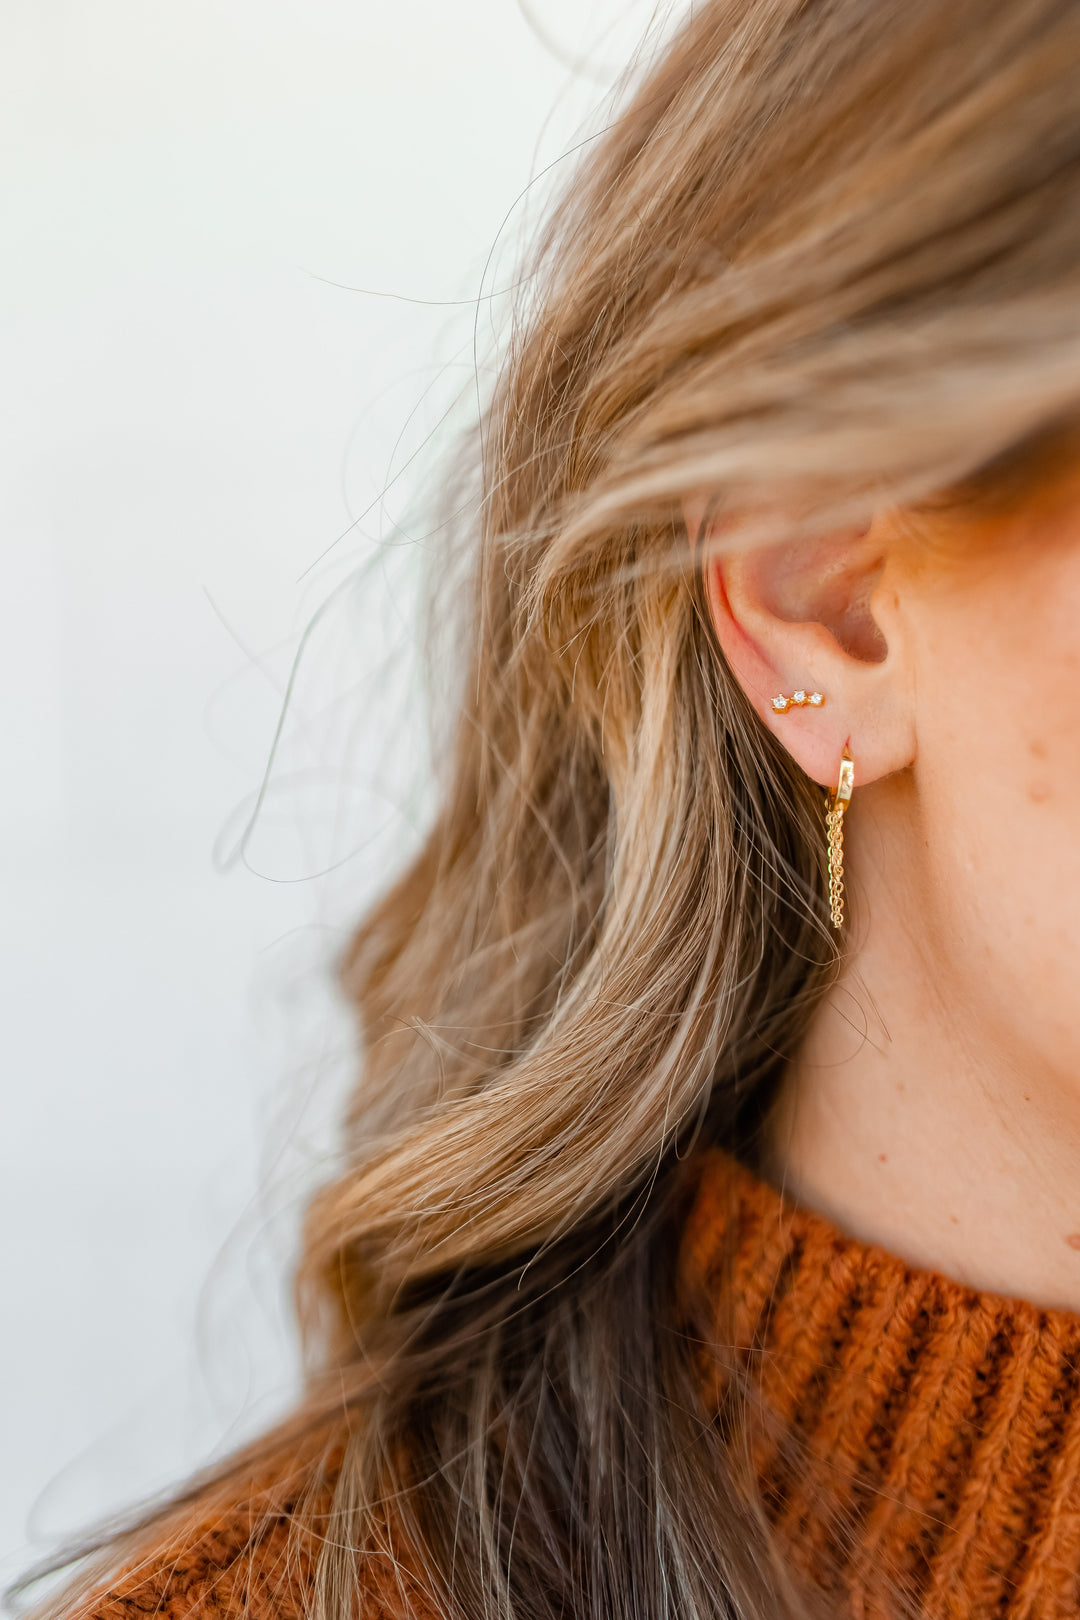 The Gold Plated Climber Earrings